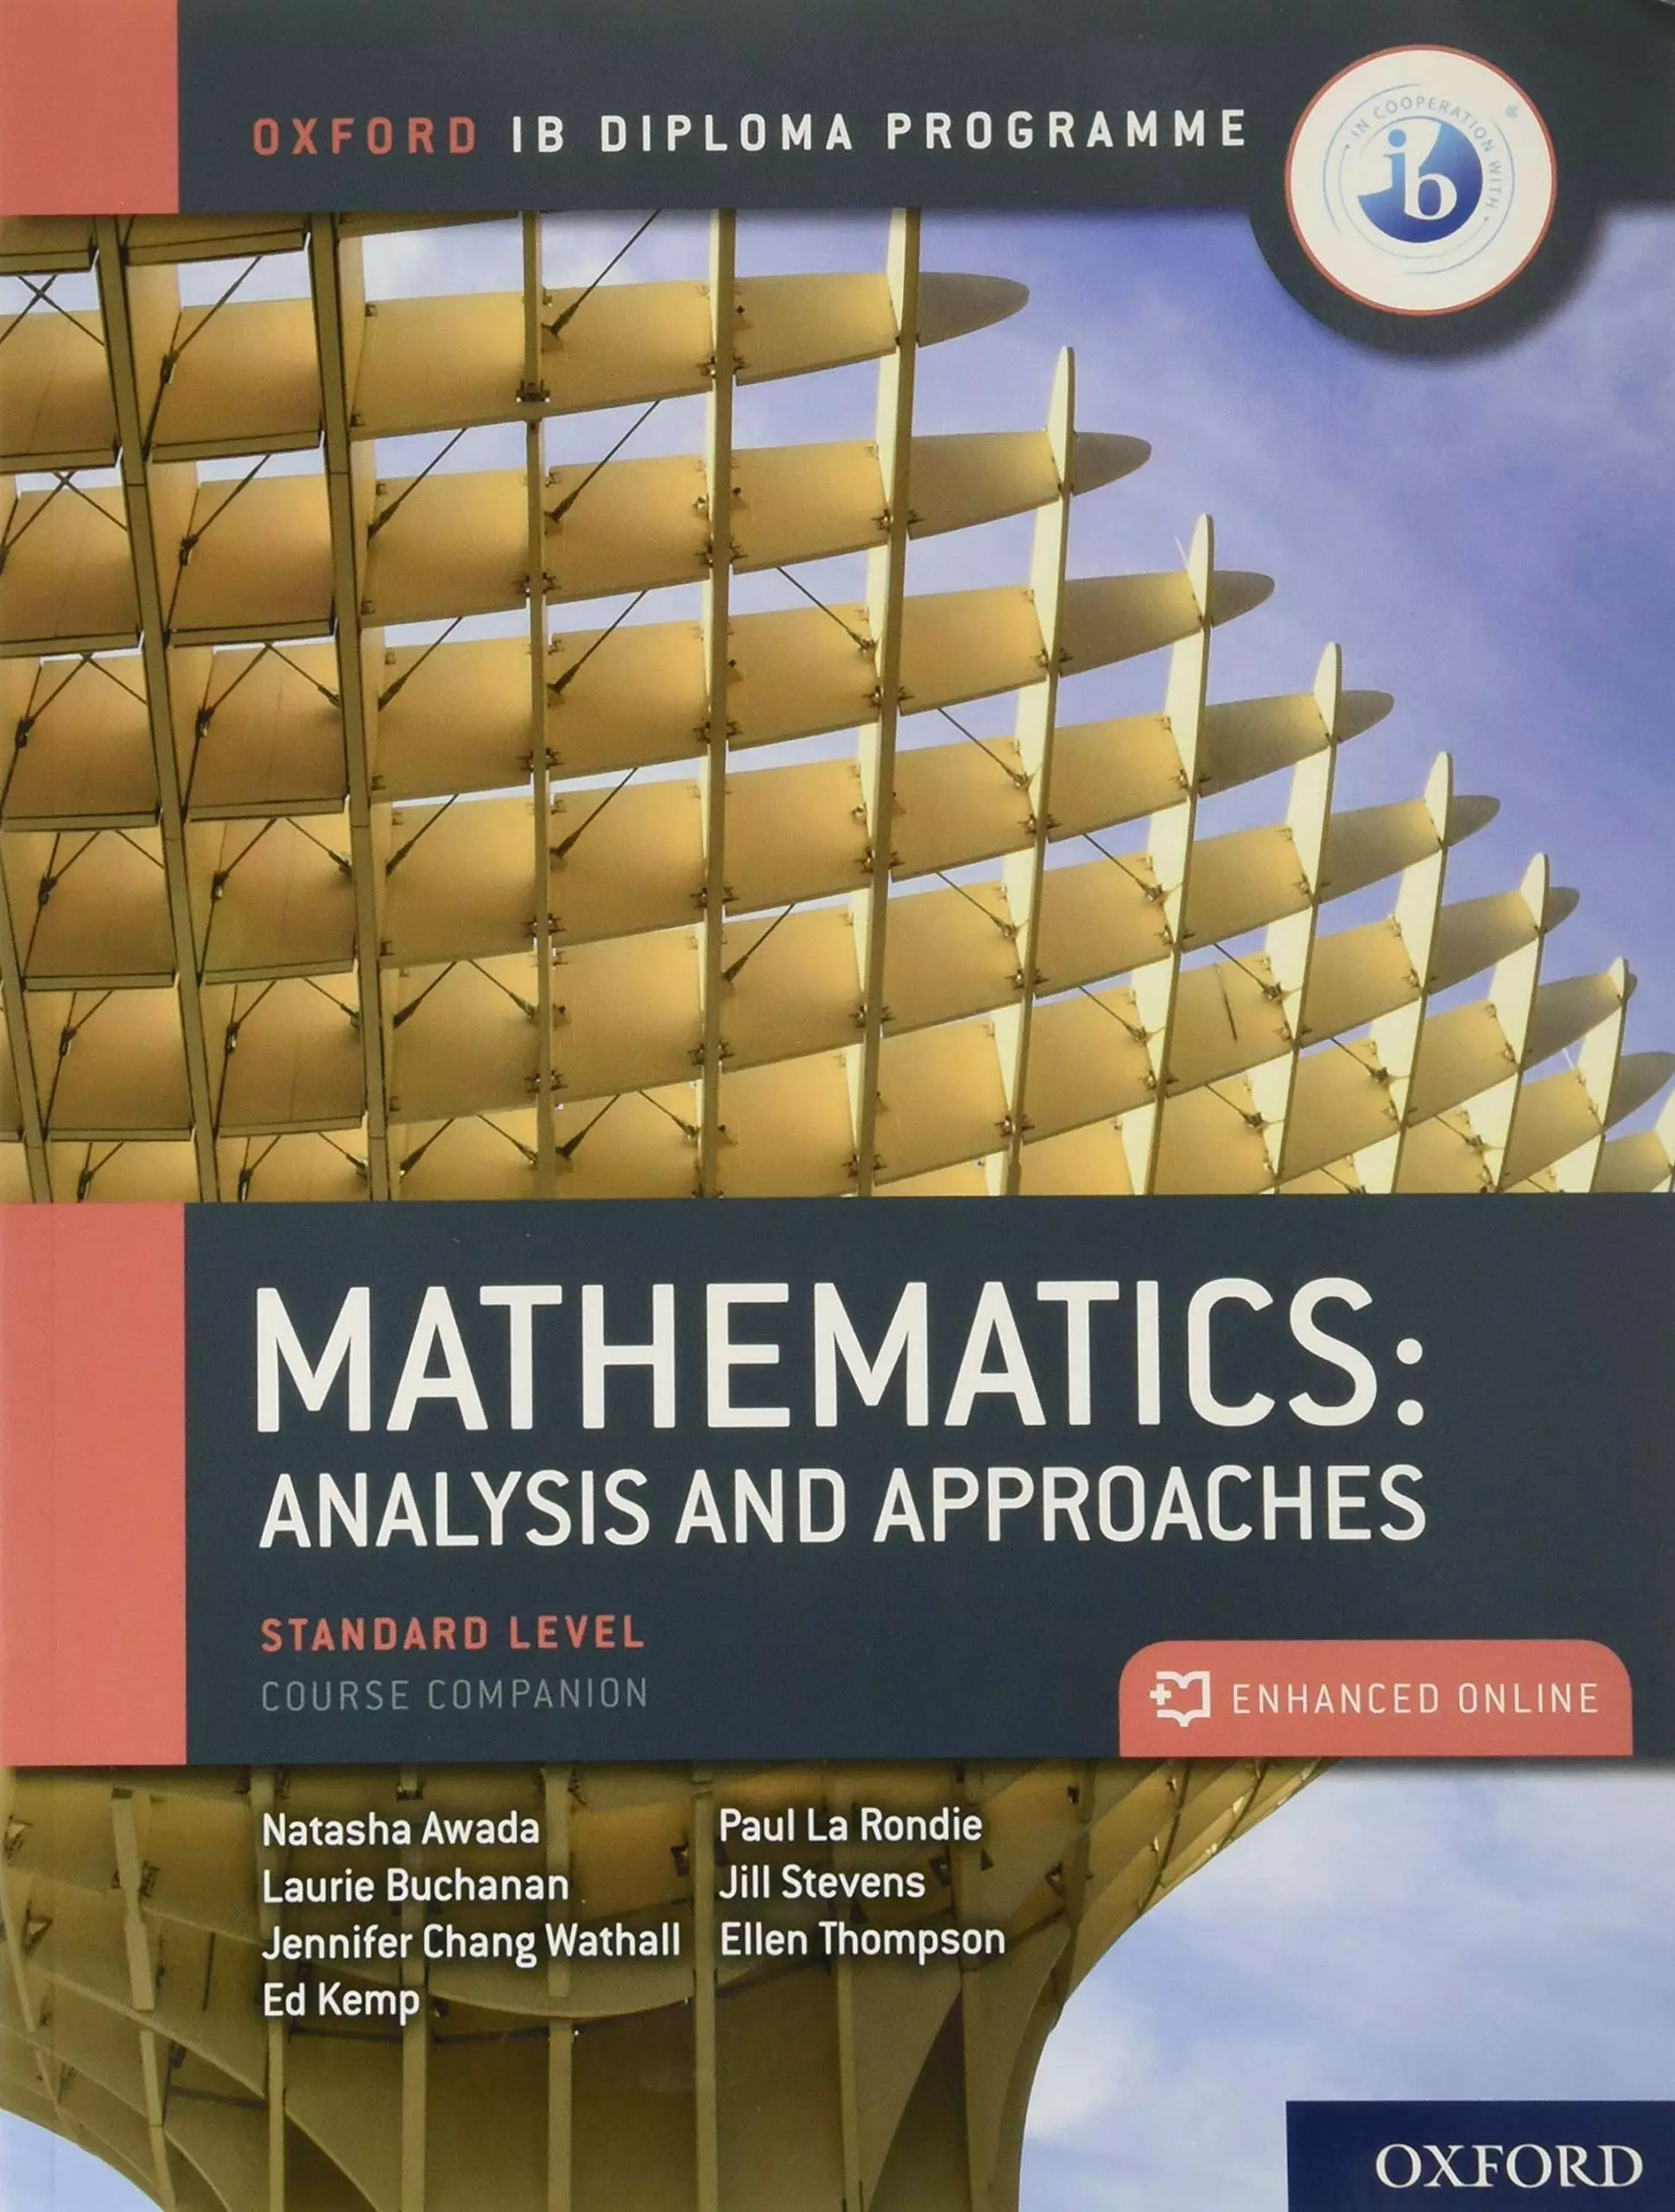 IB Math Analysis and Approaches Standard Level (SL) Oxford eBook download